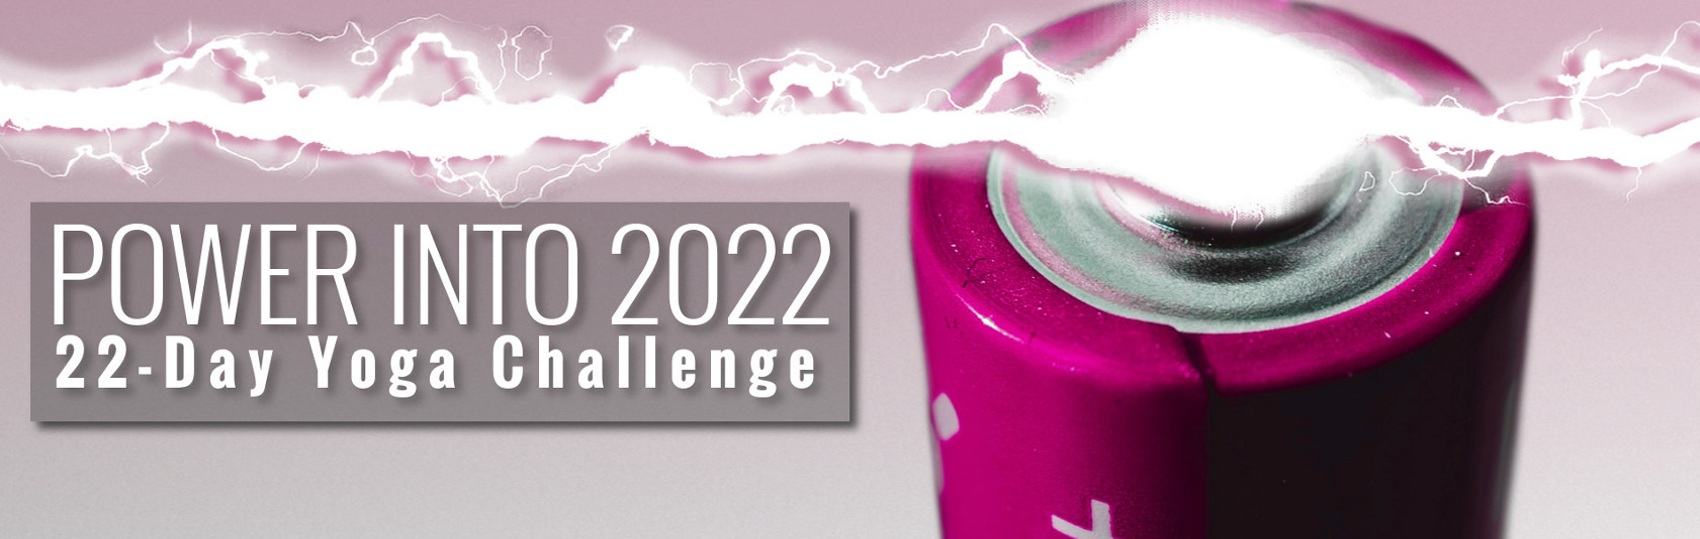 Join our 22-Day New Year's Challenge